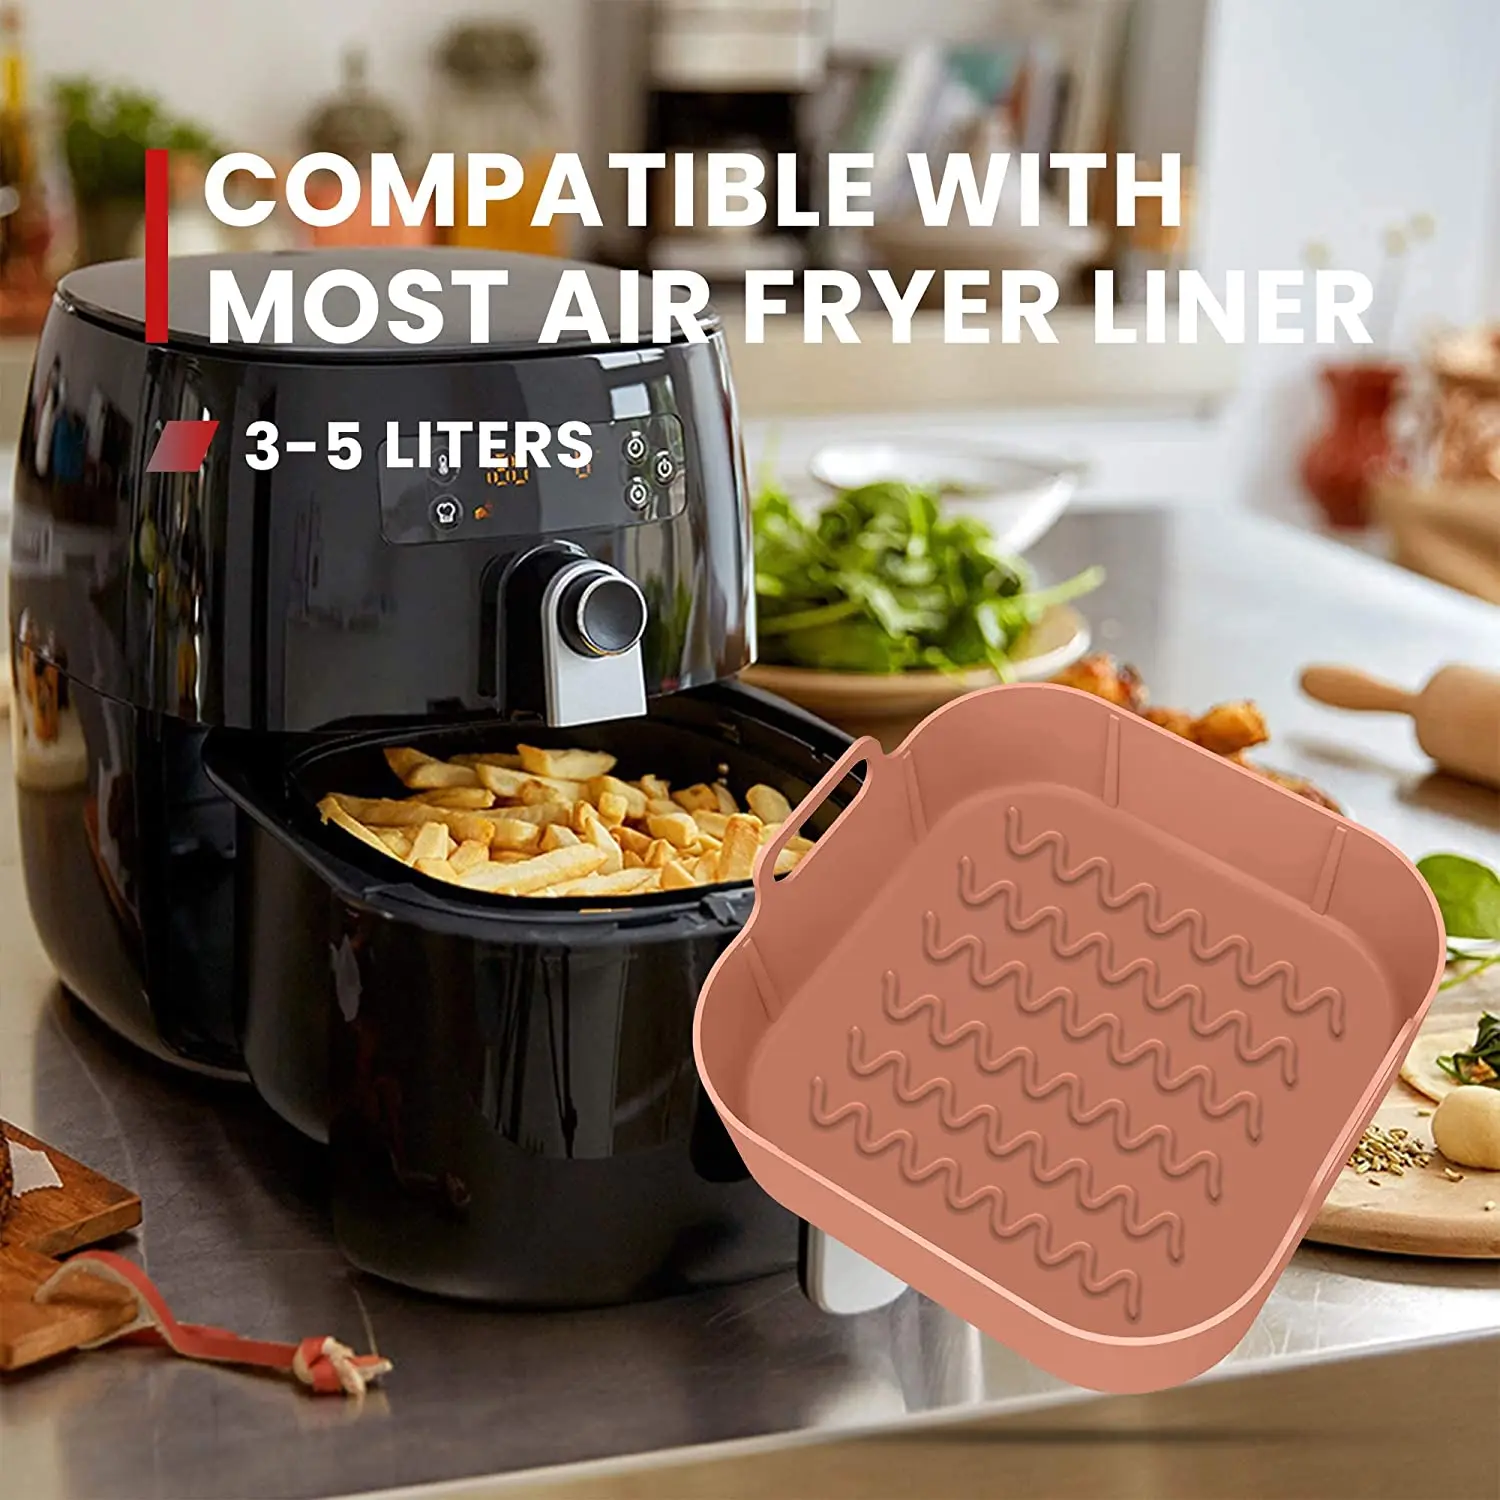 2pcs Air Fryer Silicone Liners Pot Basket Square, Easy Cleaning Air Fryer Accessory, Replace of Parchment Paper Liner, Food Safe Reusable Air Fryer